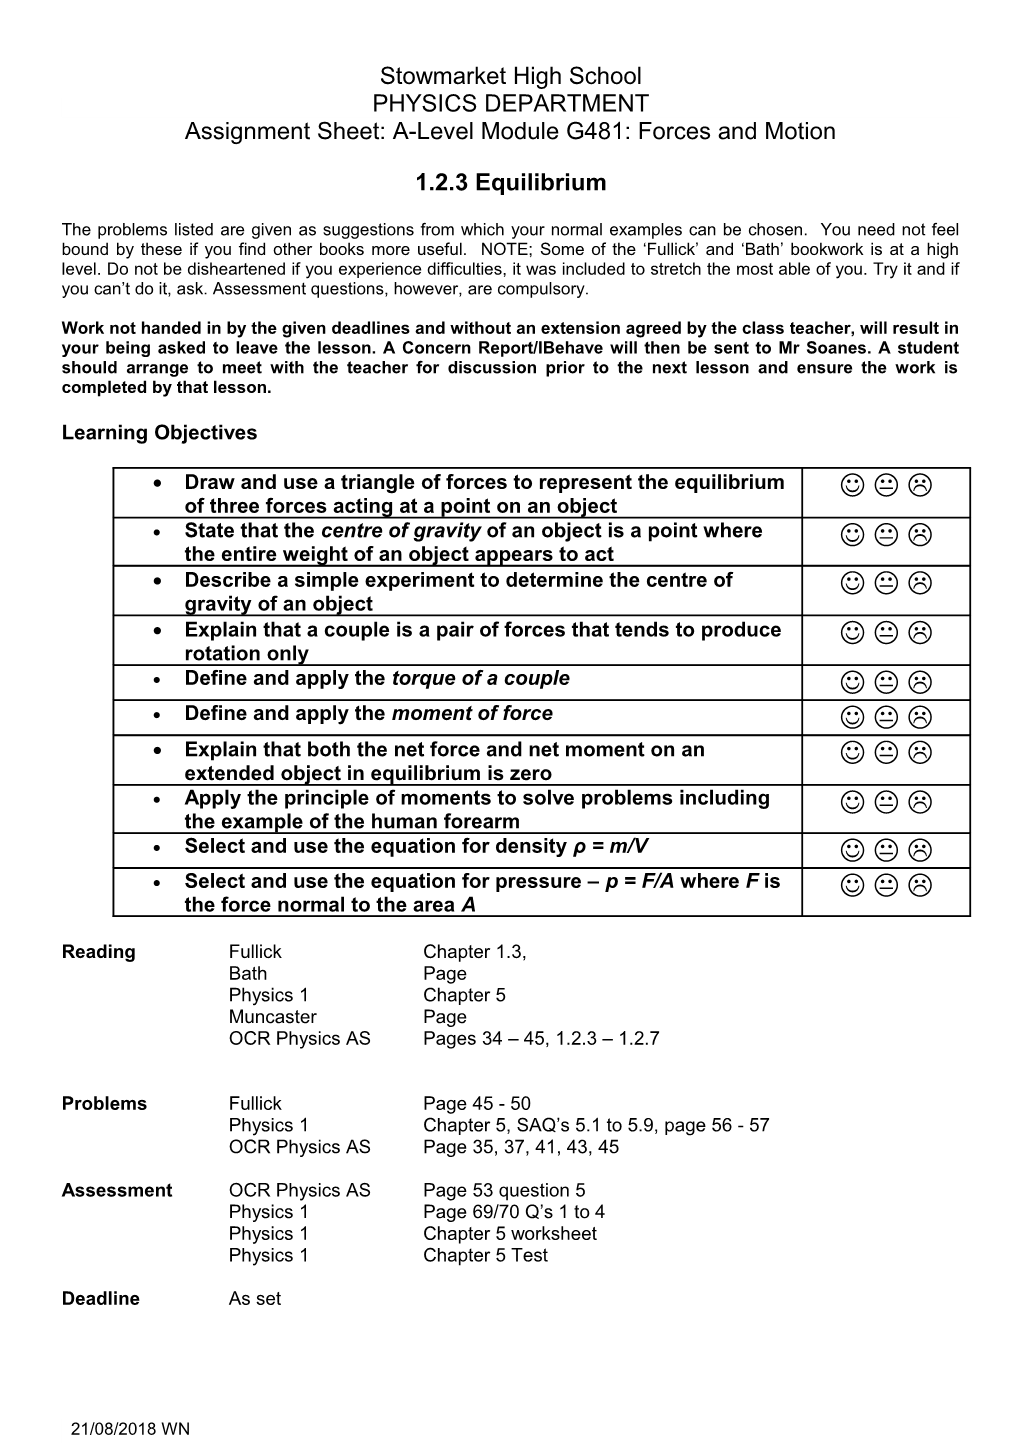 Assignment Sheet: A-Level Module G481: Forces and Motion